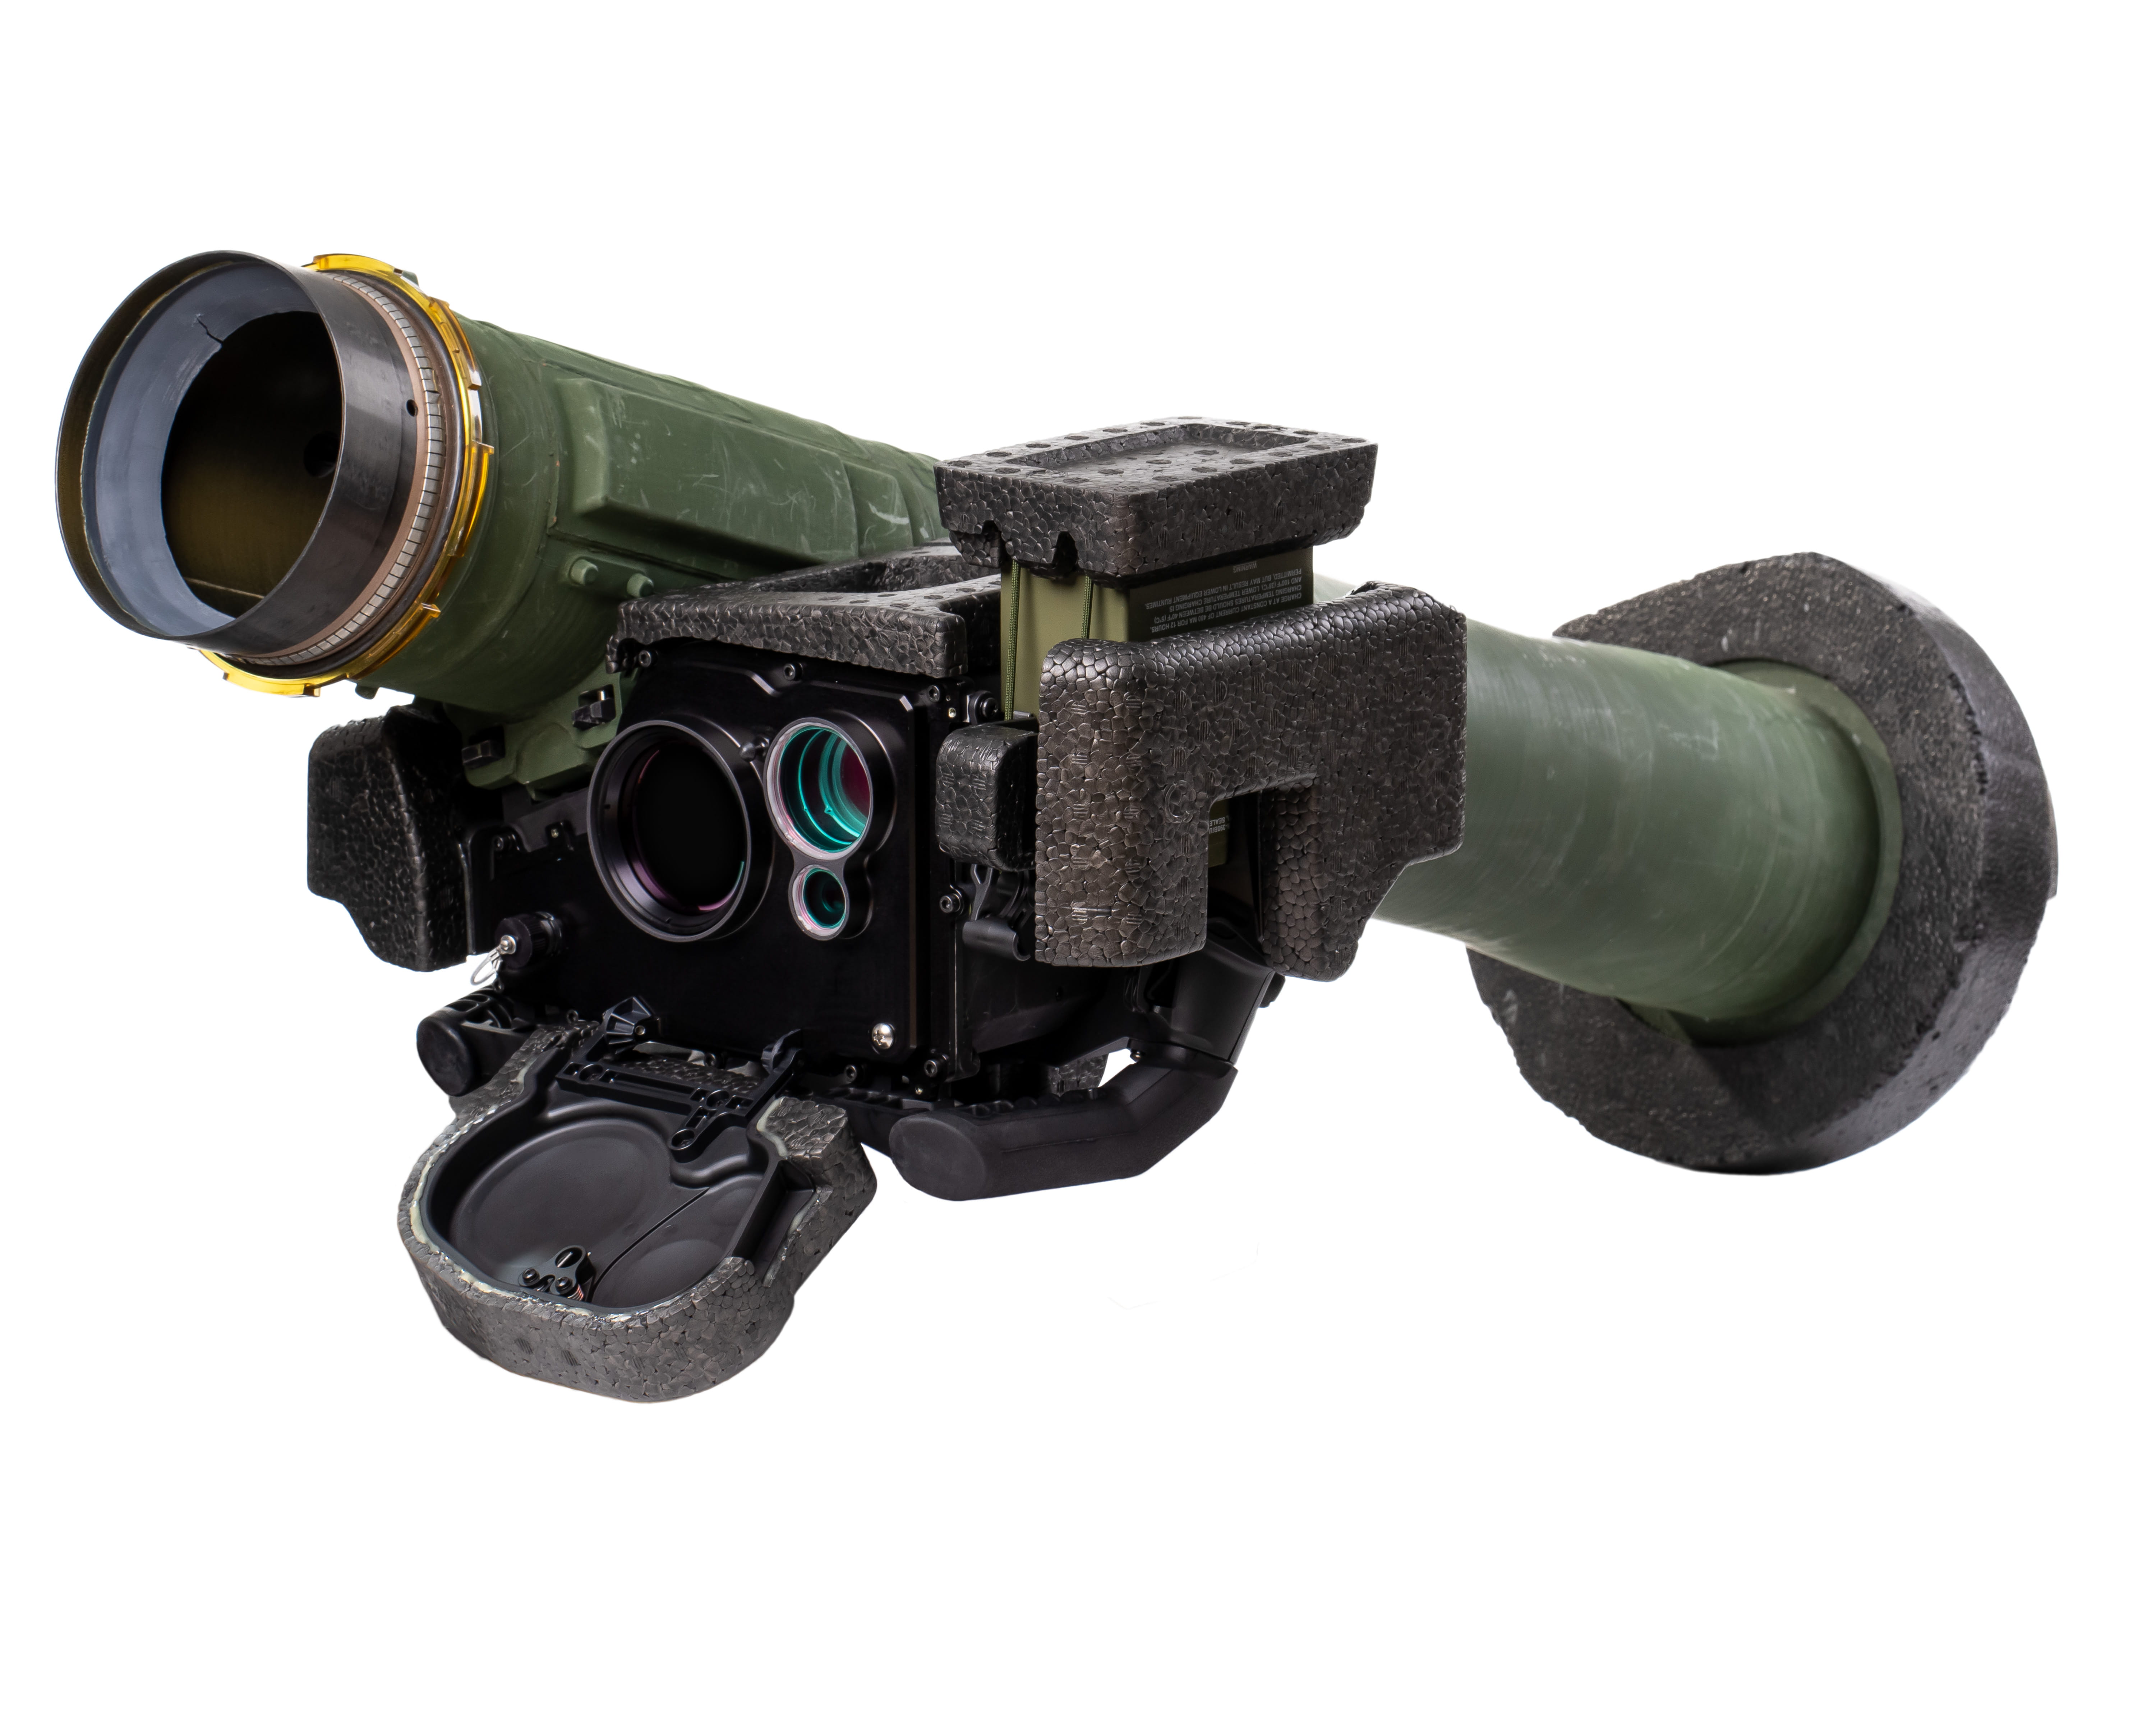 The primary mission of Lightweight Command Launch Unit (LWCLU) is as the launcher for the Javelin missile, however, its superior optics also allow for stand-alone Intelligence, Surveillance and Reconnaissance missions. 